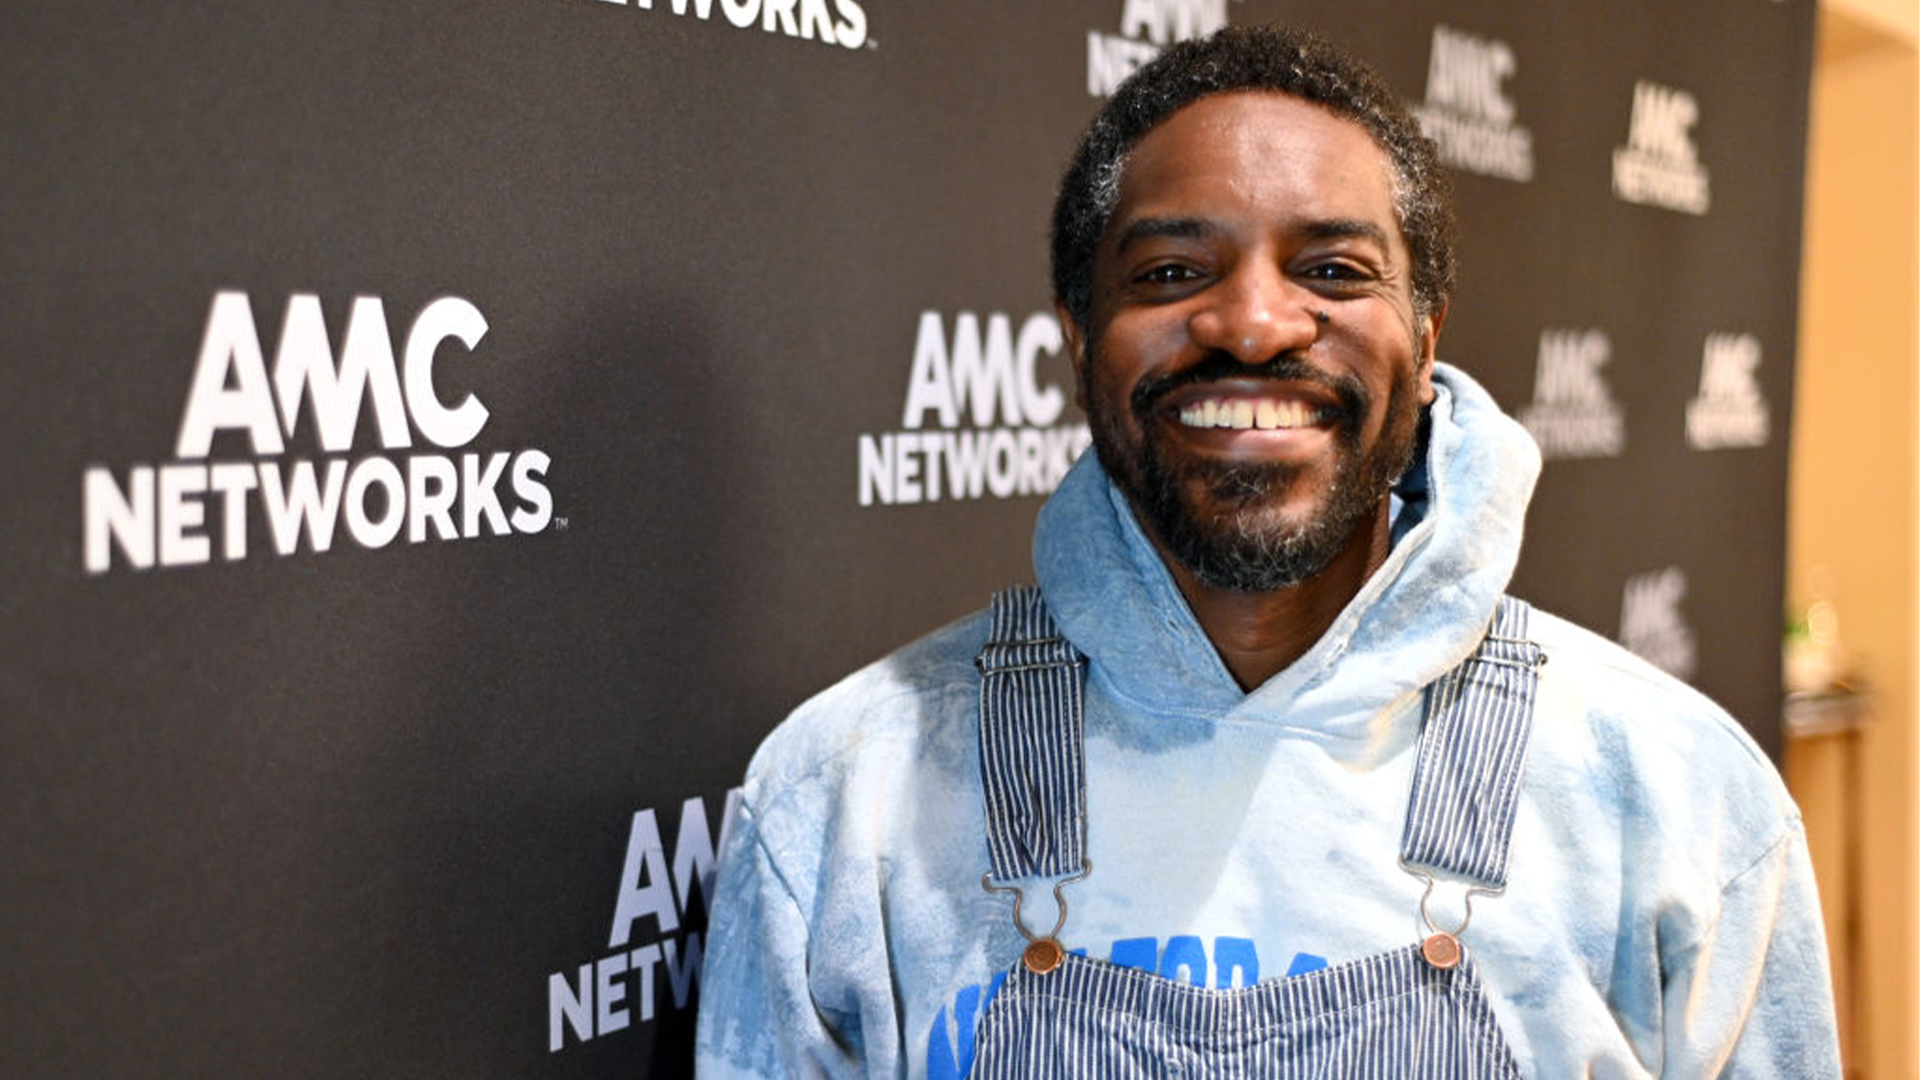 For His Supreme Debut, Andre 3000 Worked With The Company's Black Creative Director And Was Shot By A Black Photographer